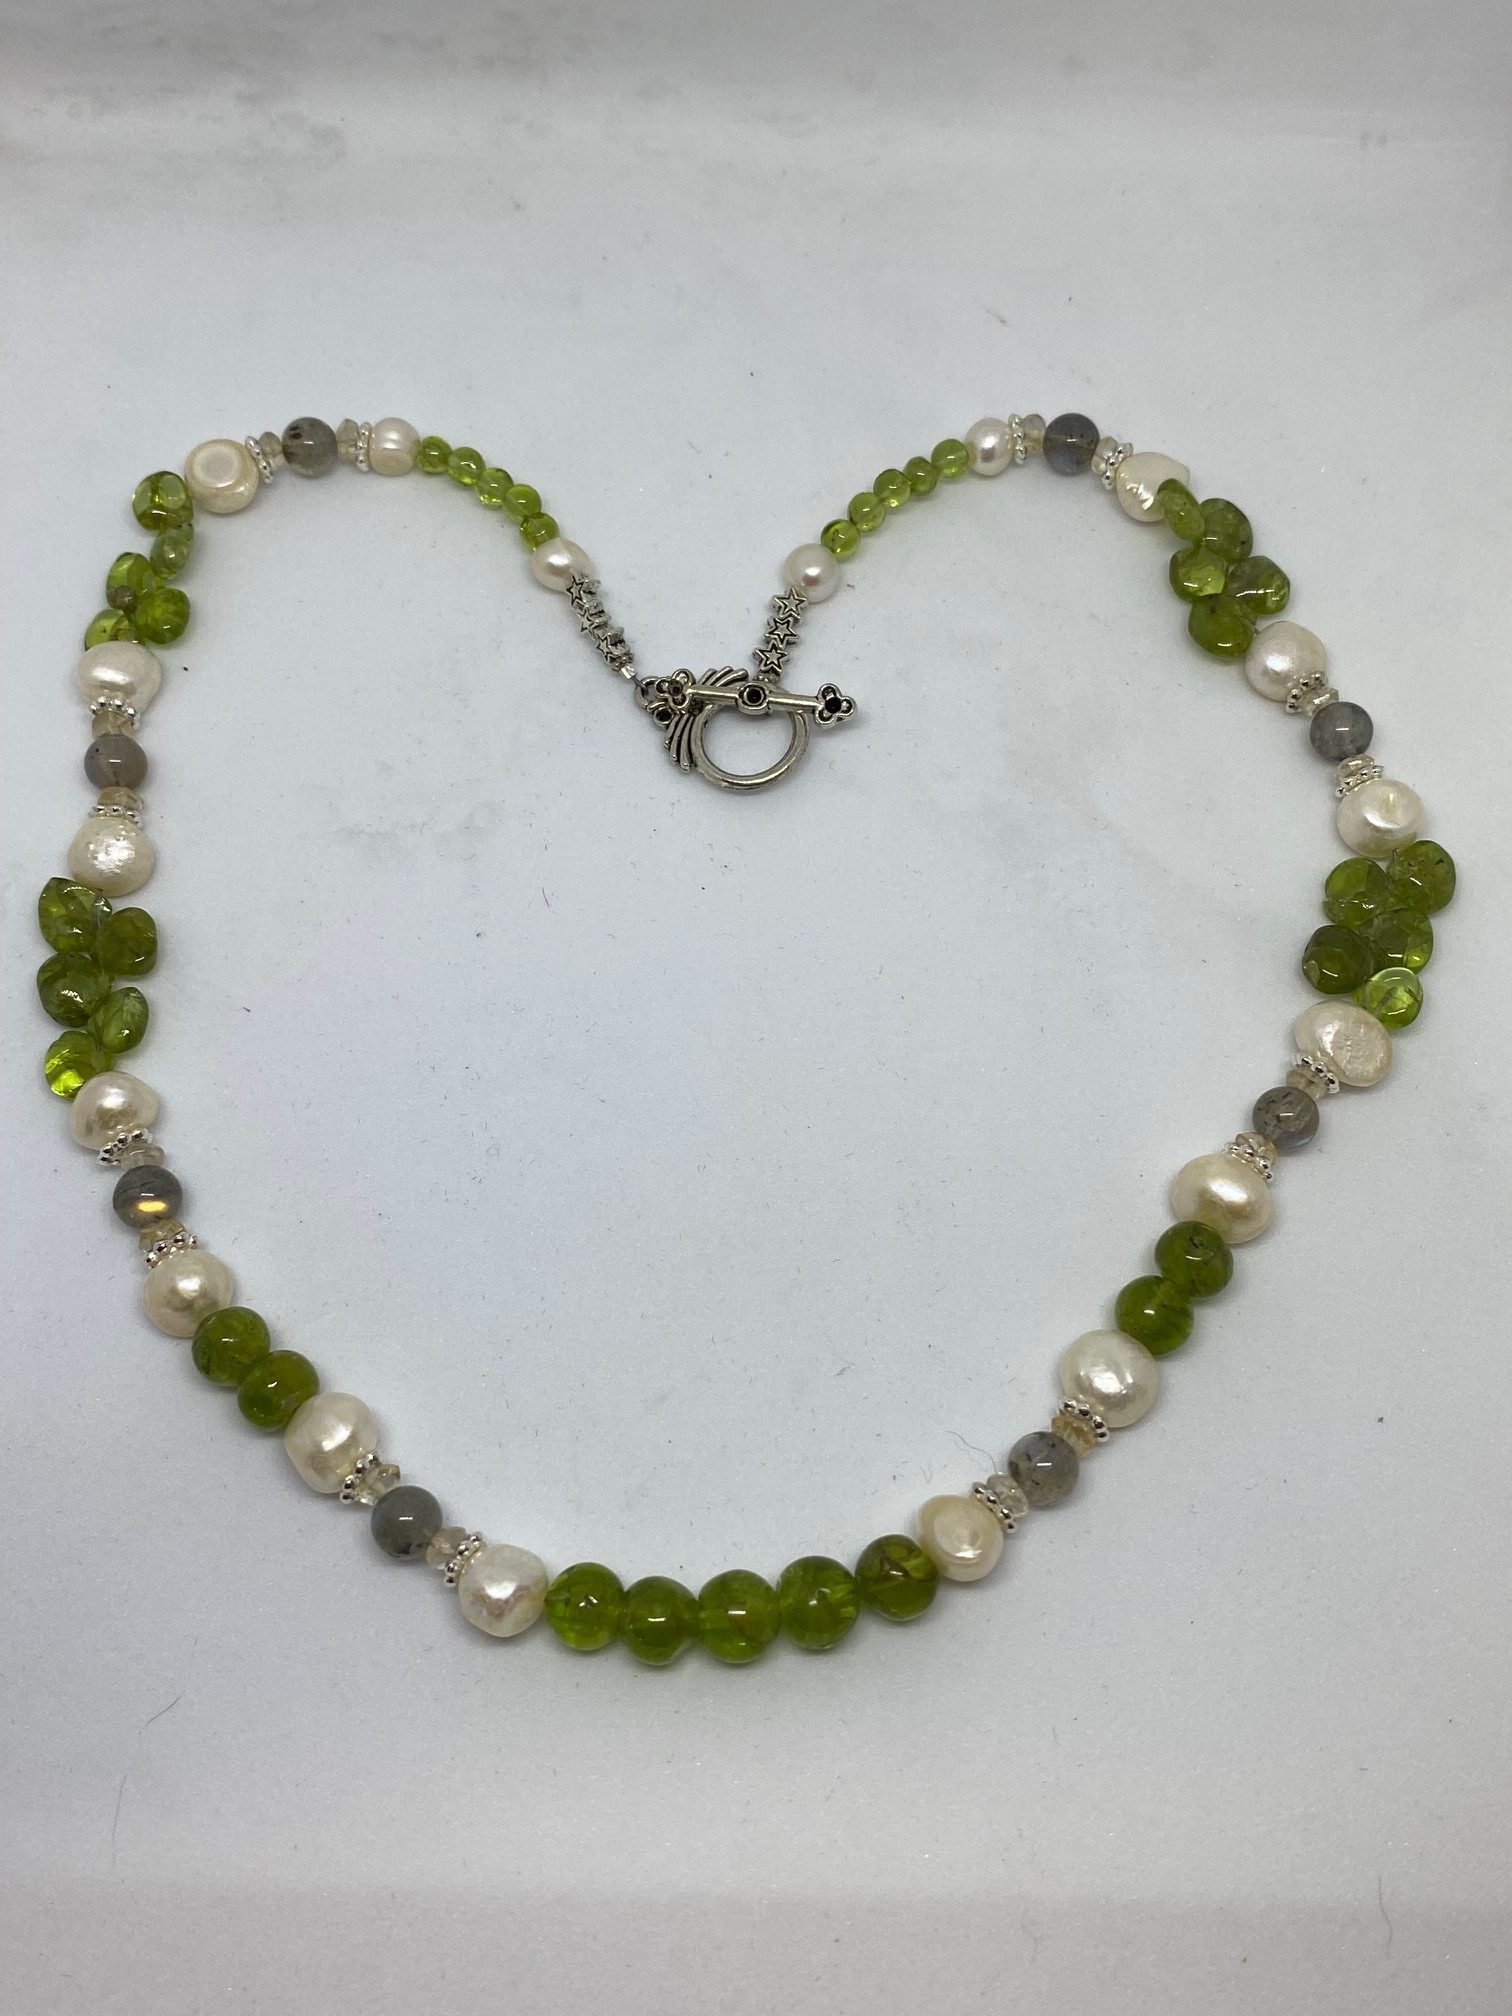 Peridot, Pearl, and Labradorite Necklace. This necklace promotes Prosperity, Tranquility, and Protection. 